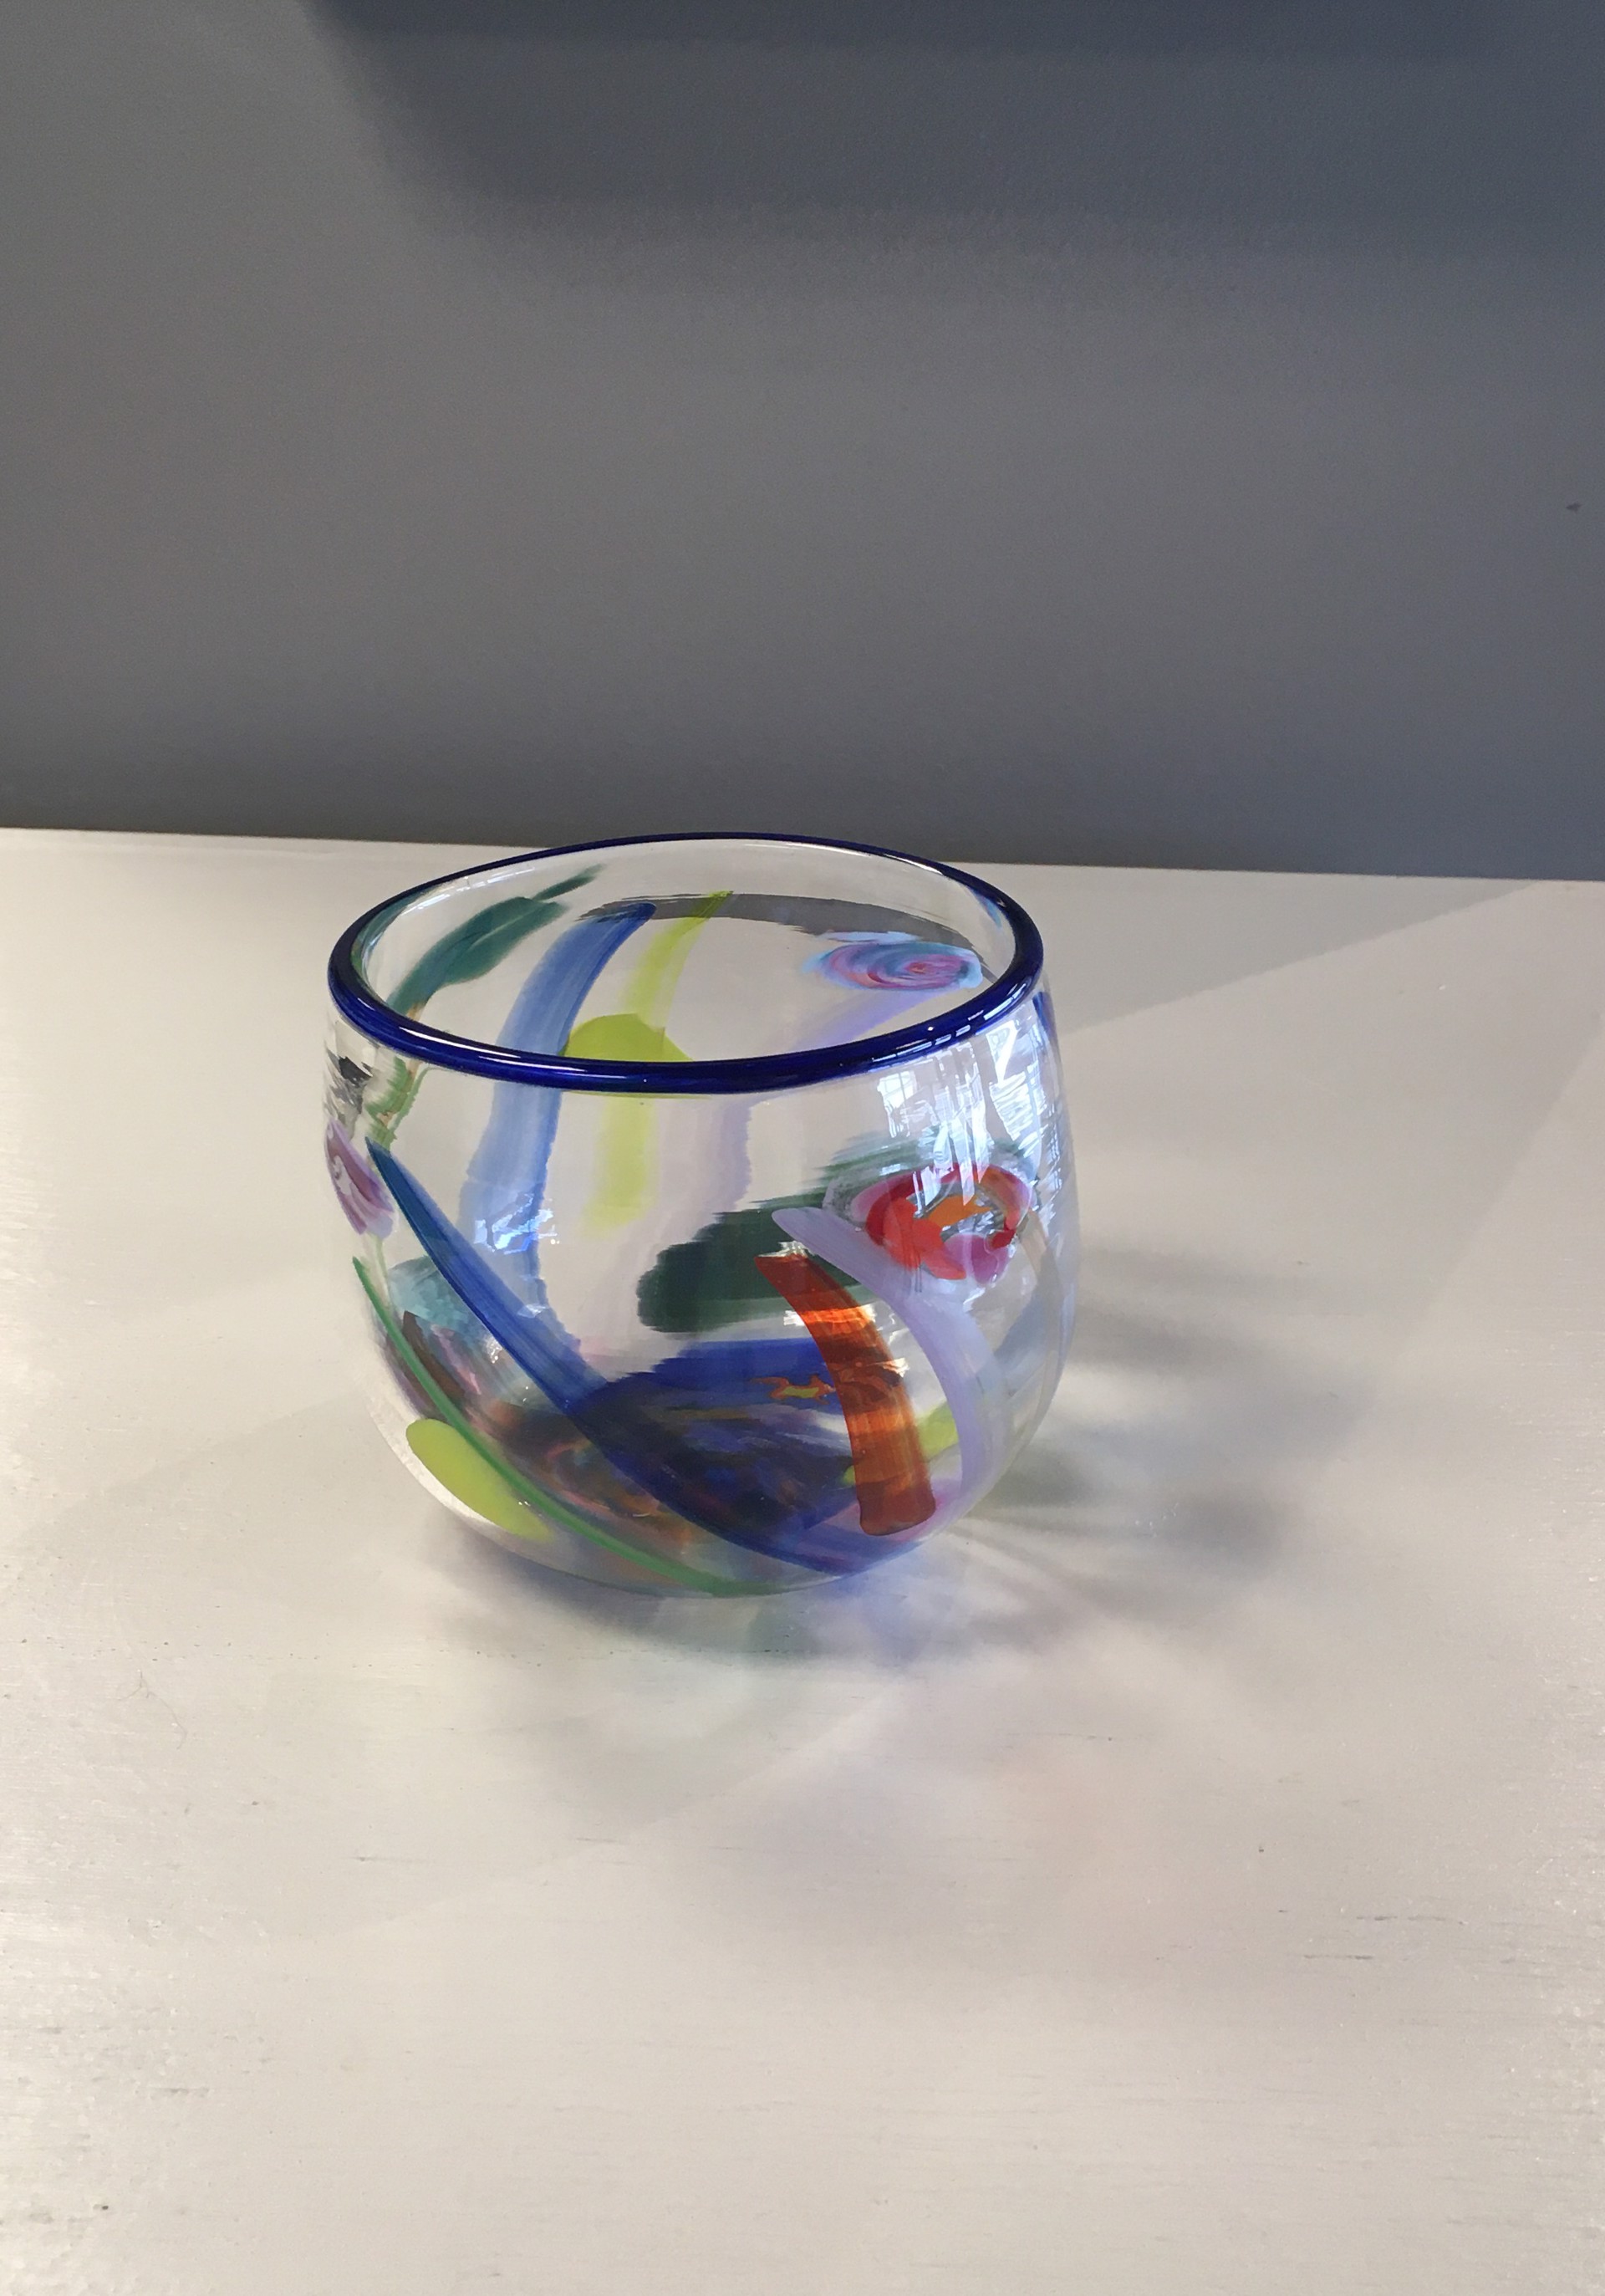 Circus open bowl by AlBo Glass